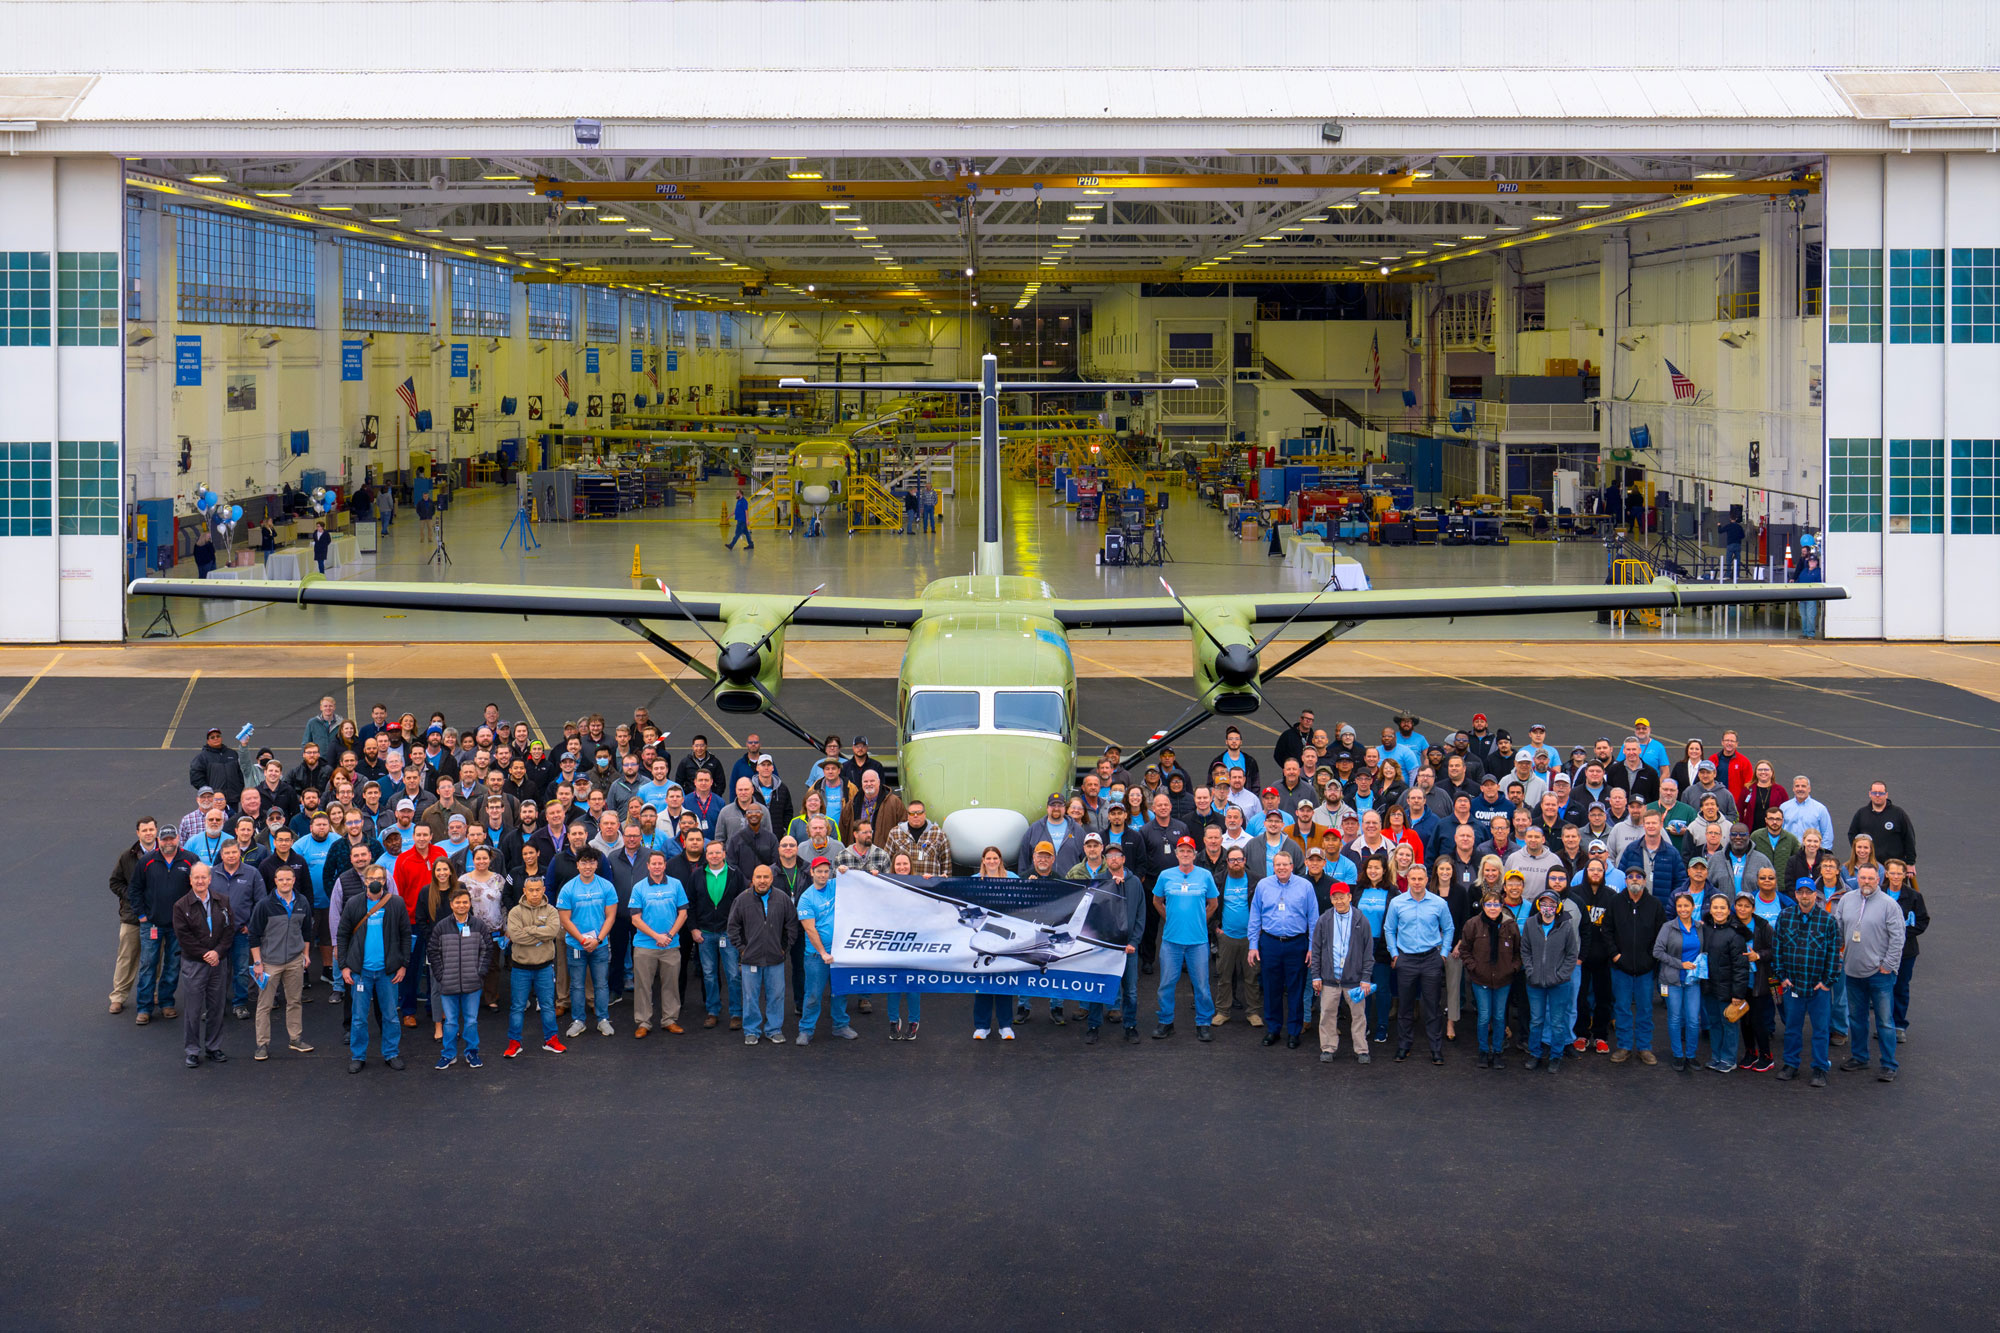 Textron Aviation rolls out first production Cessna SkyCourier large-utility turboprop, highlights innovations in manufacturing and serviceability